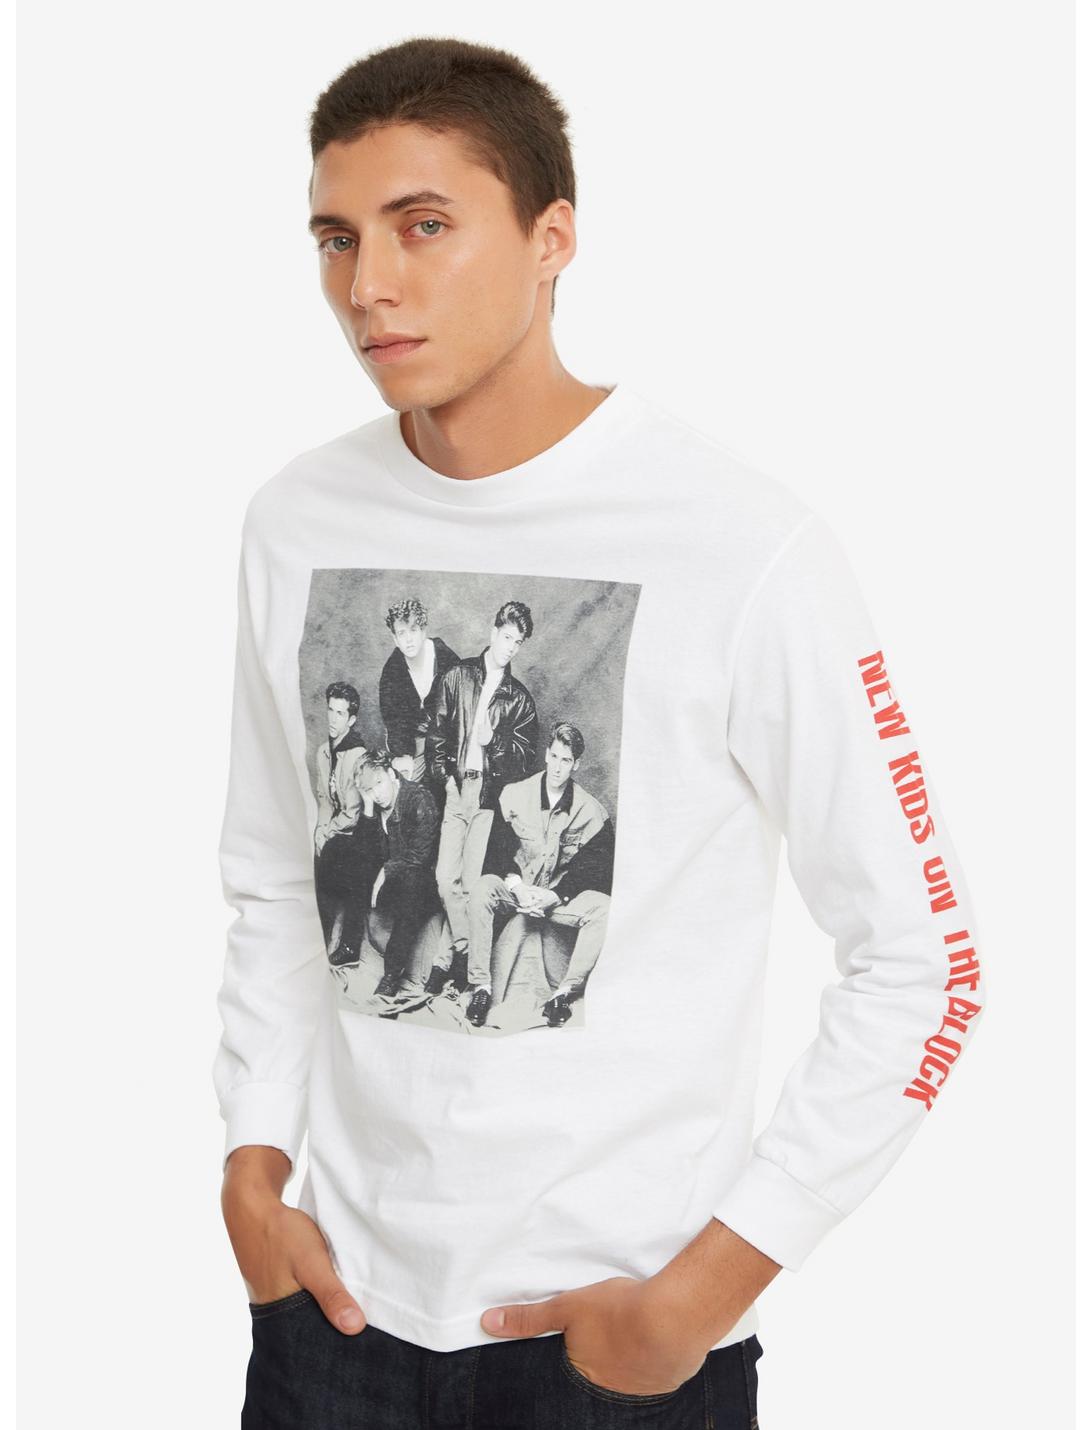 New Kids On The Block The Total Package Tour Long-Sleeve T-Shirt, WHITE, hi-res